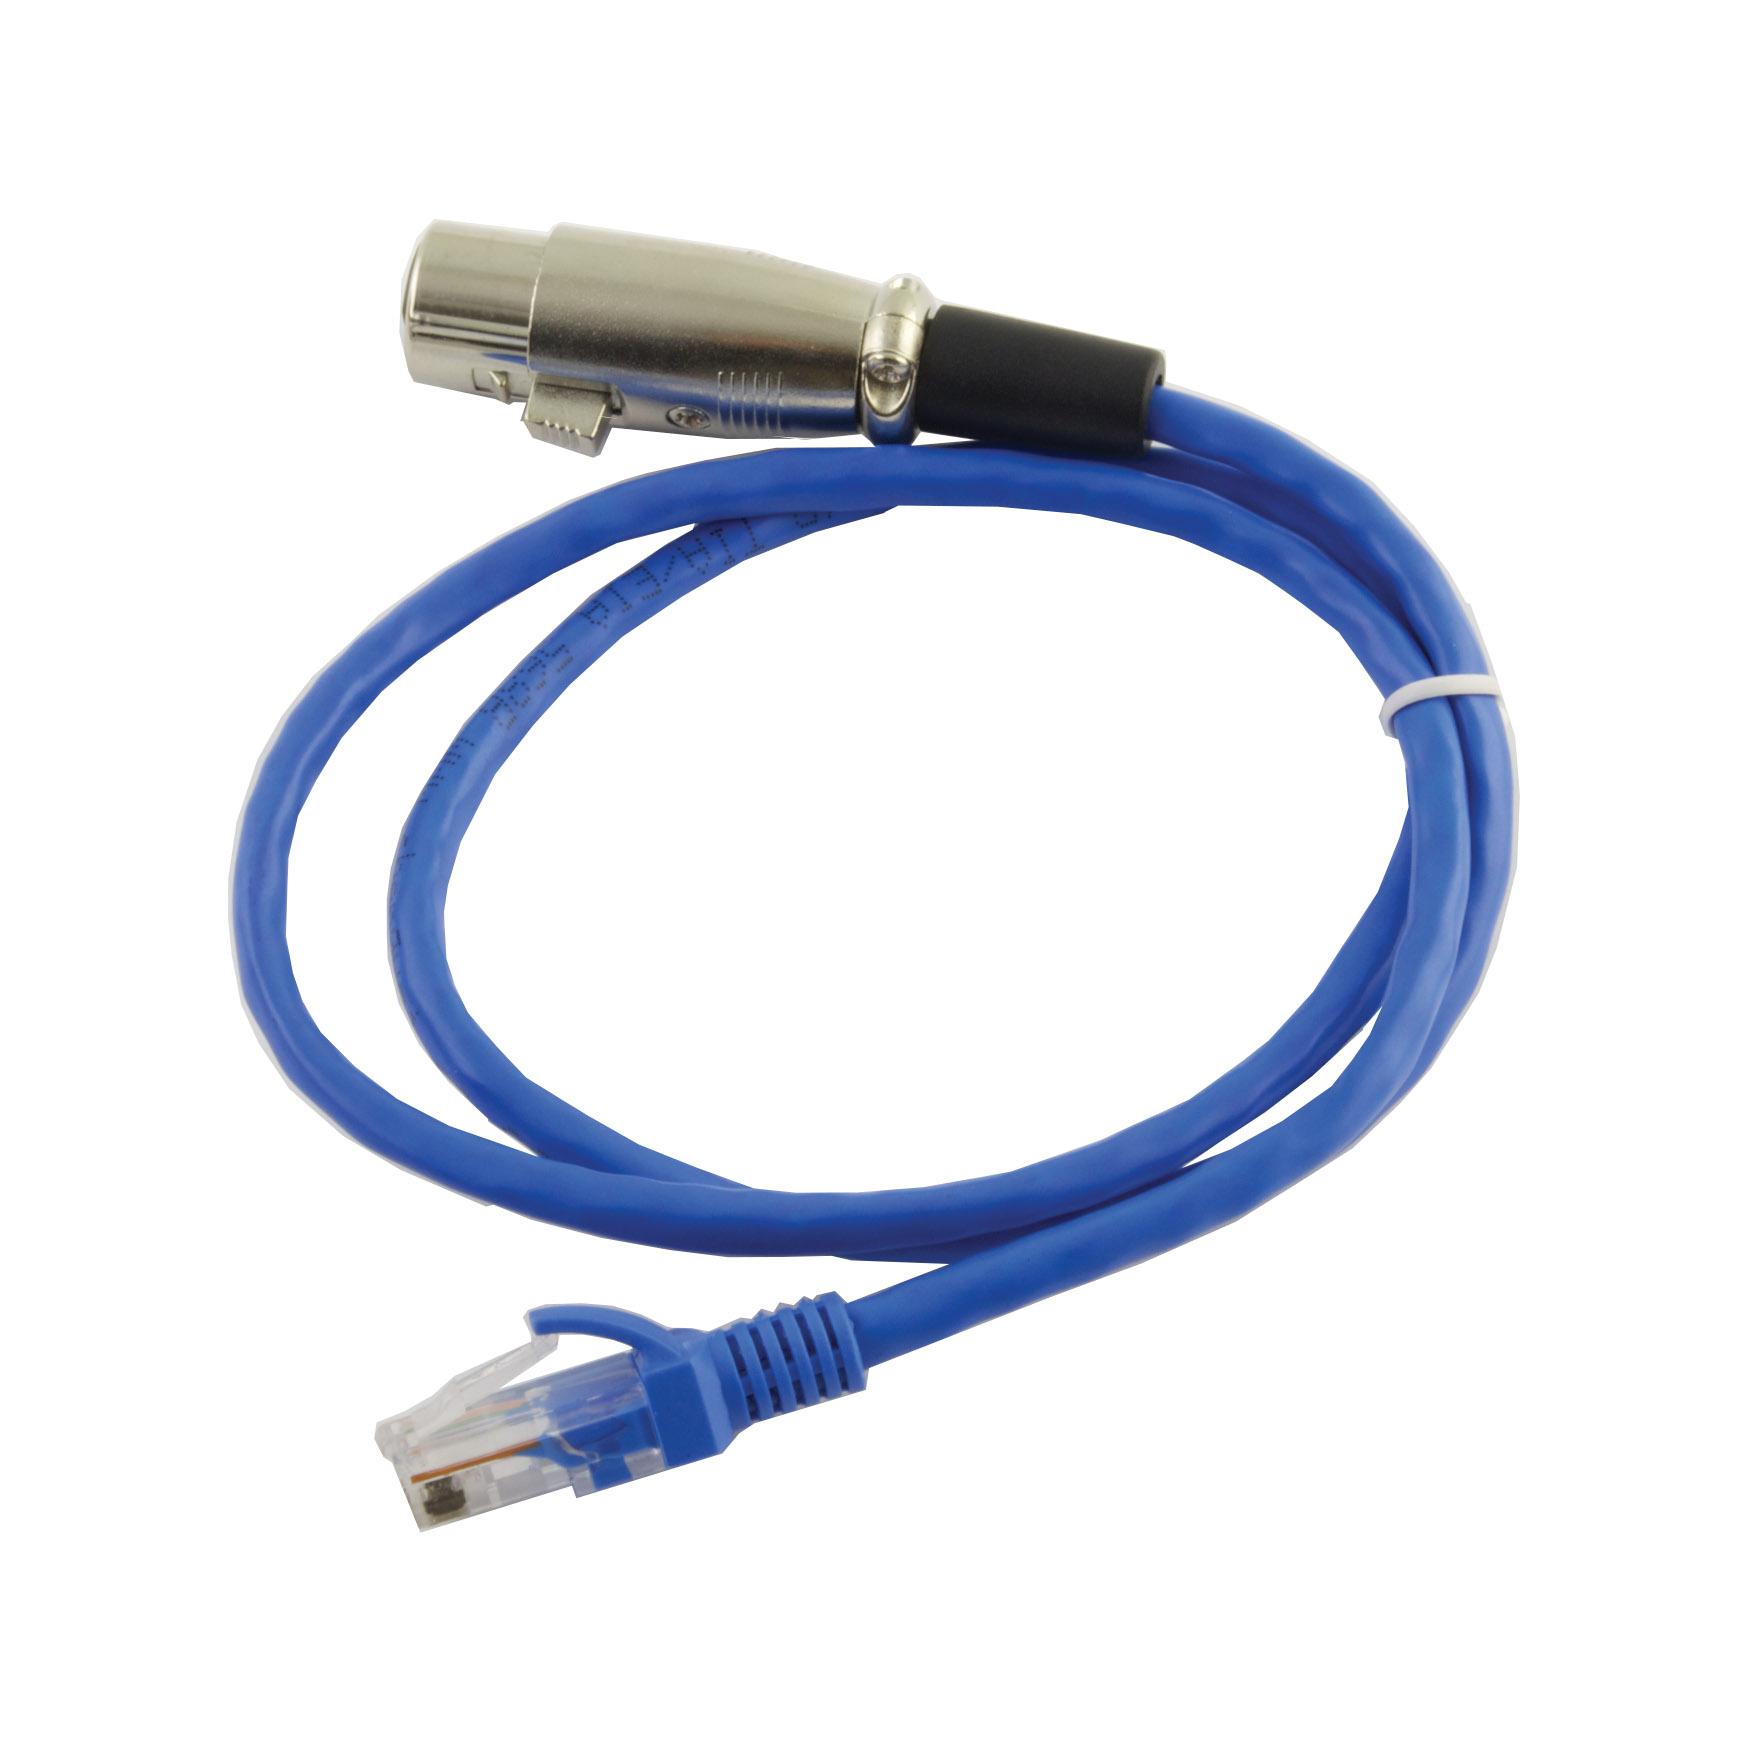 XLR-3 to RJ45 Adapter Cable Pair - male